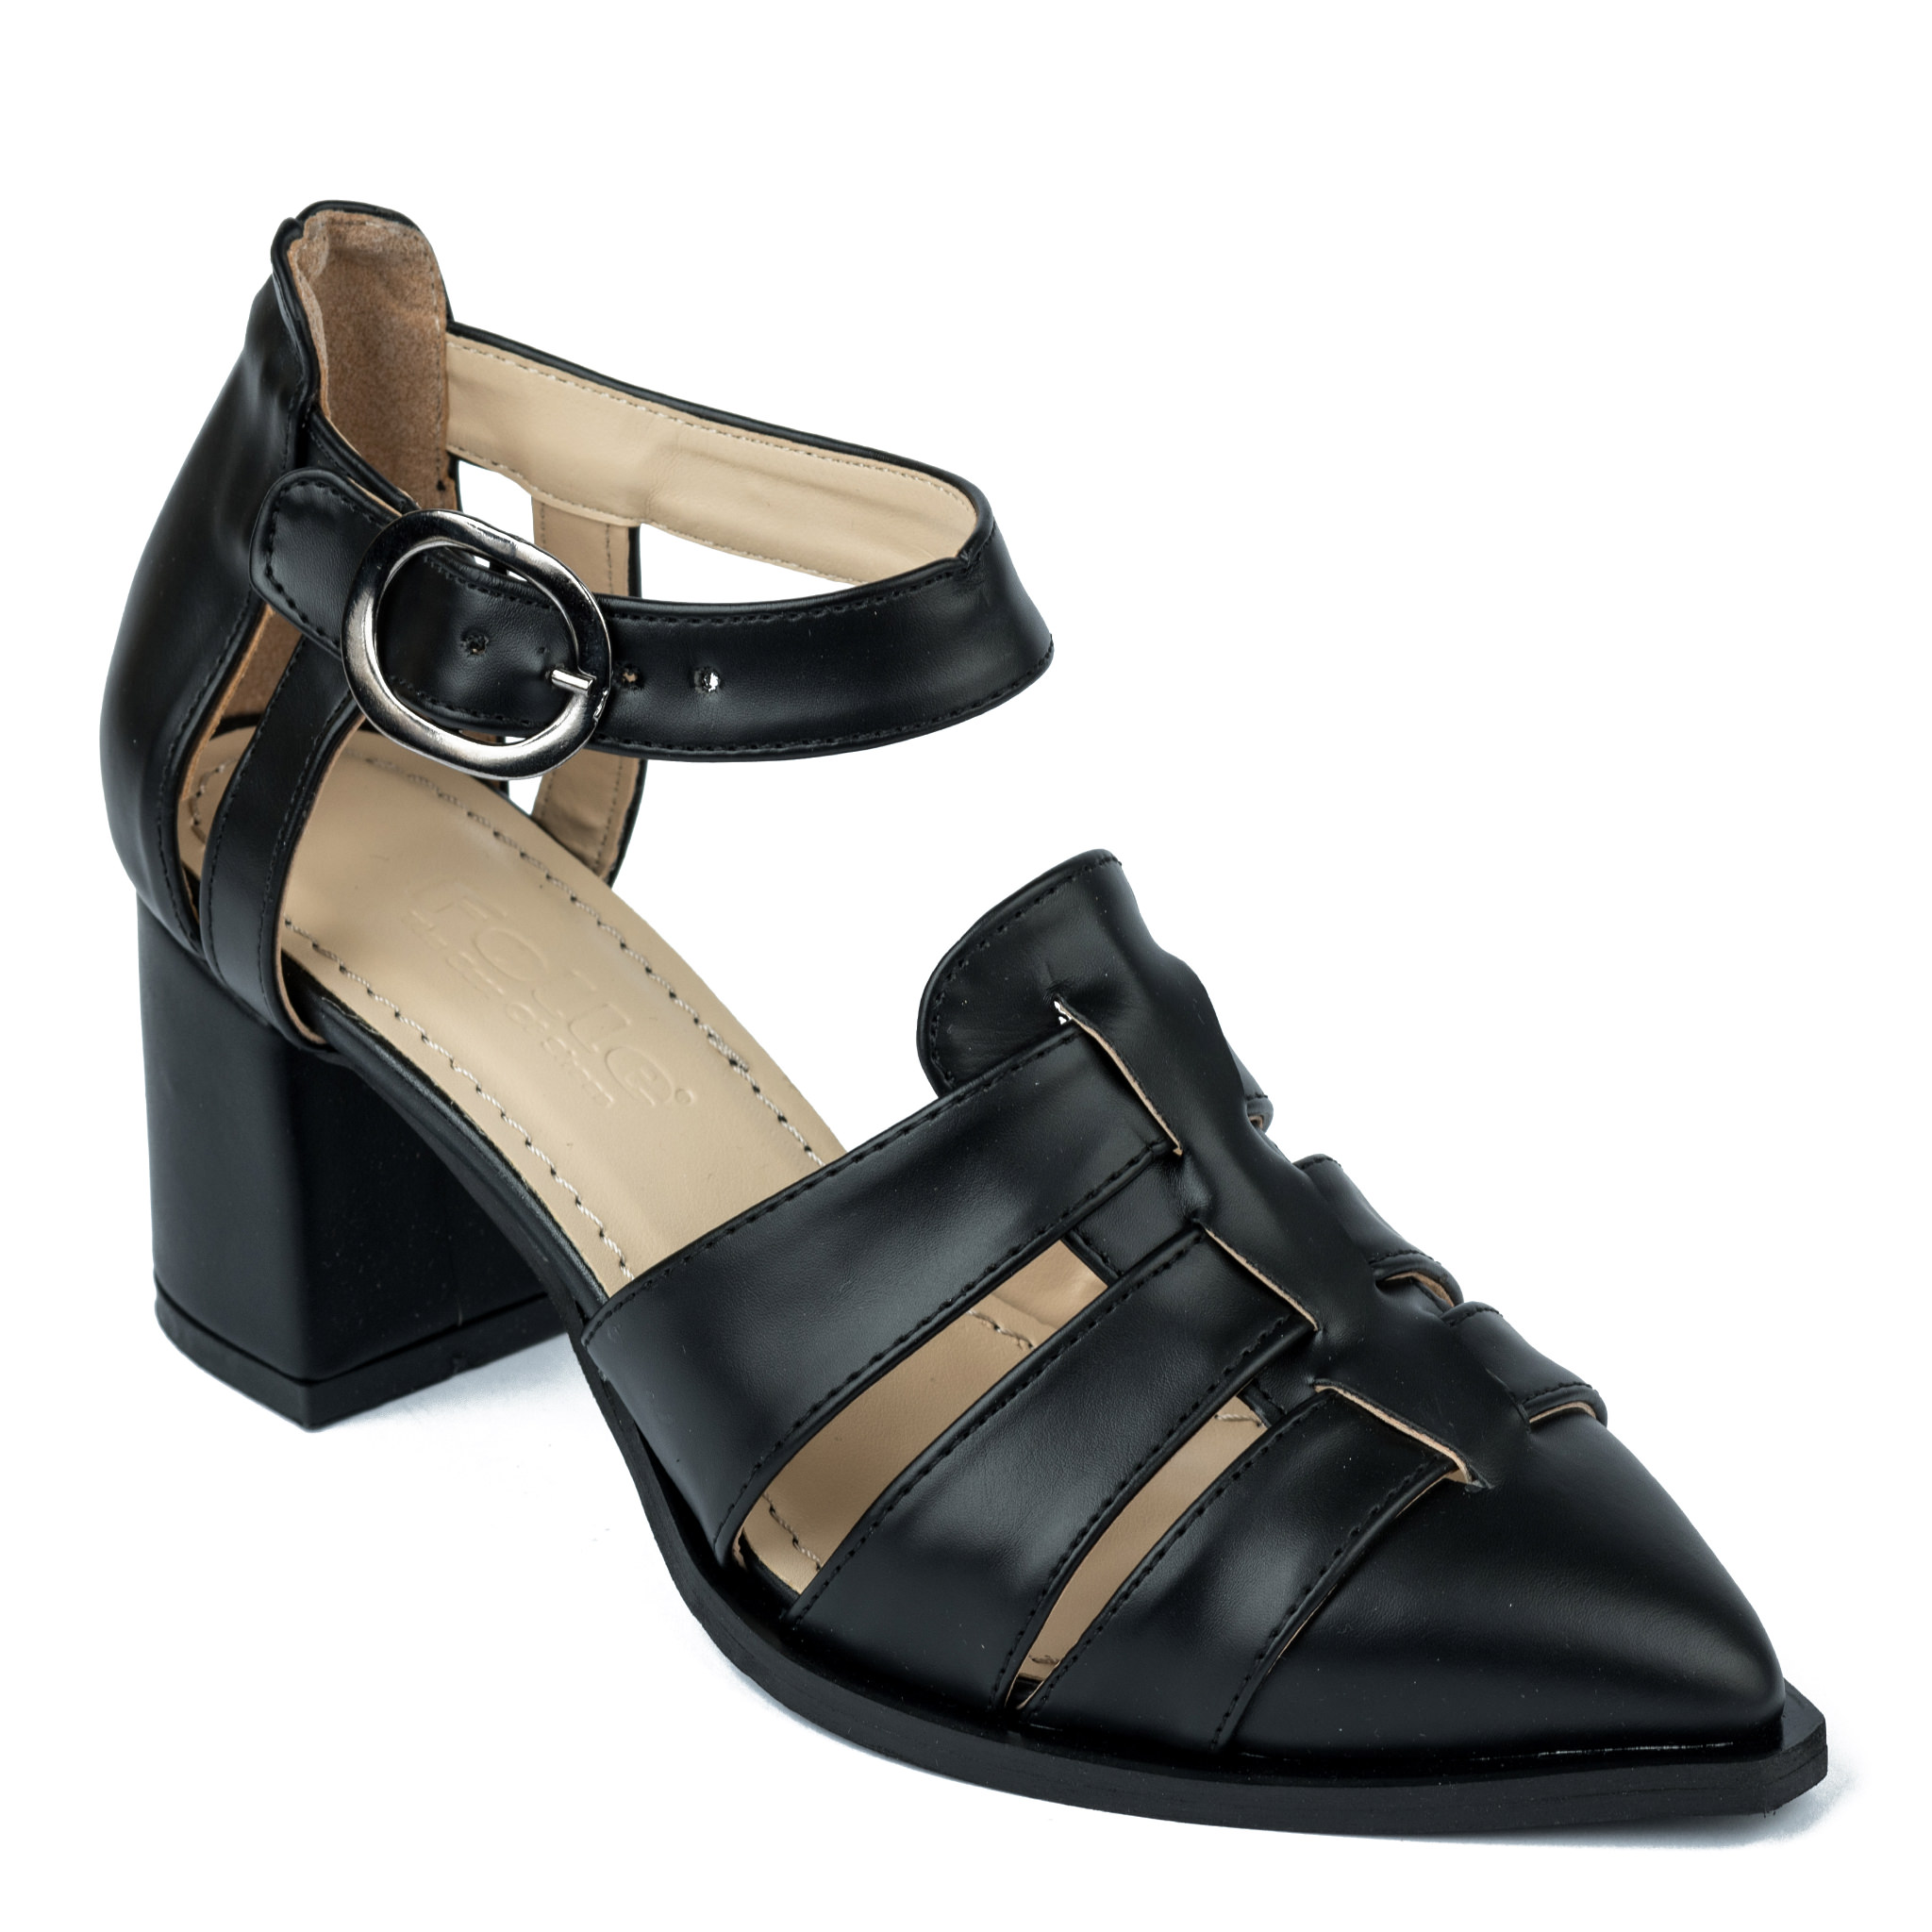 POINTED SANDALS WITH THICK HEEL AND BELTS - BLACK